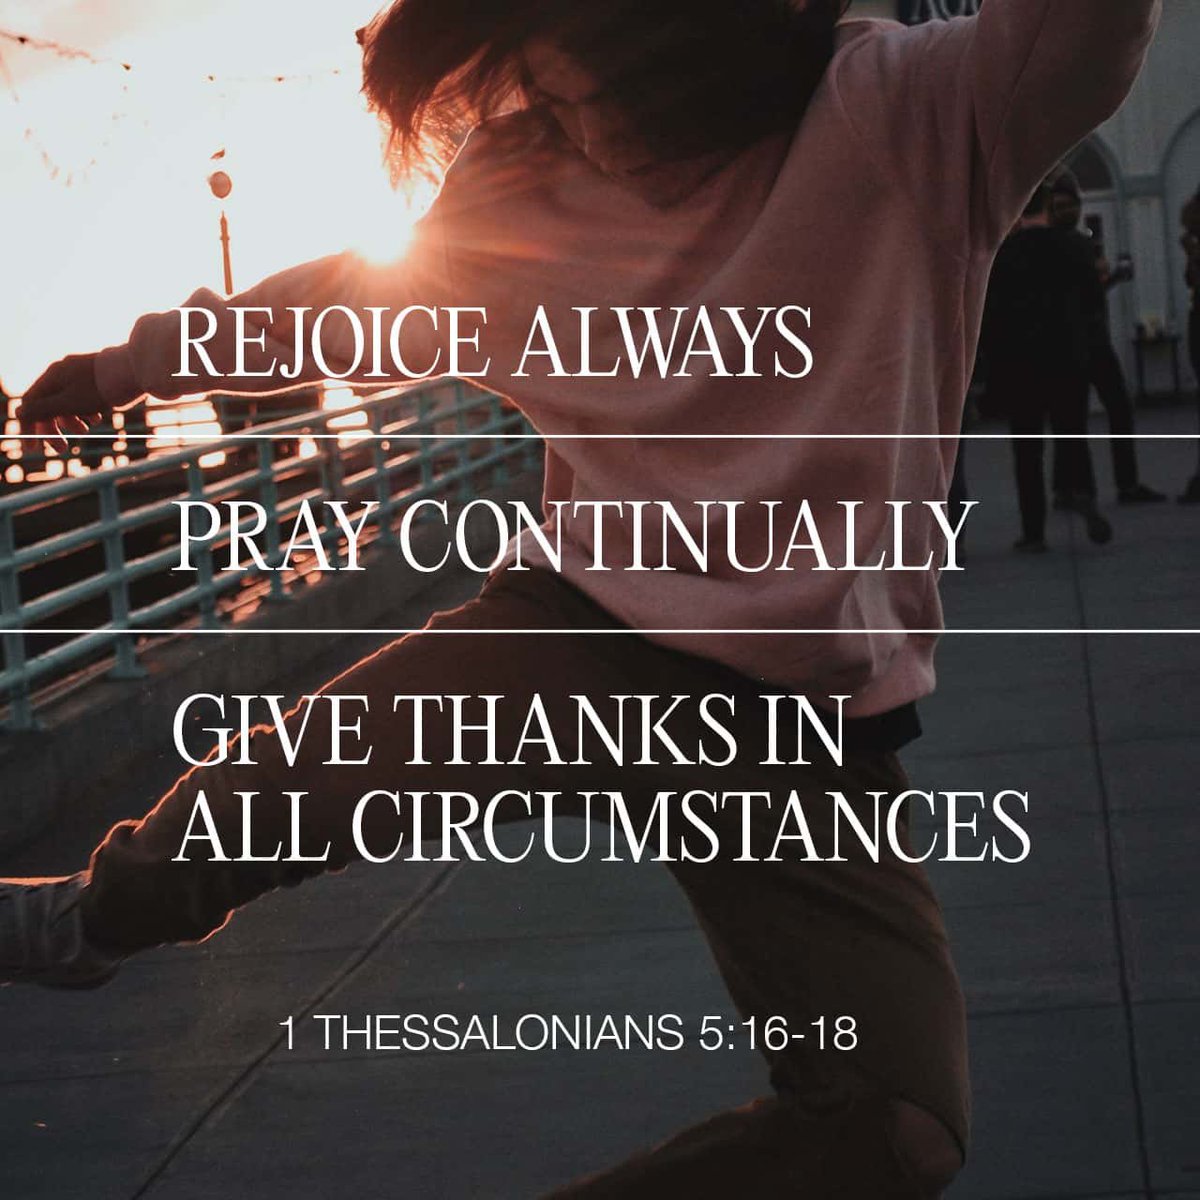 “Be happy [in your faith] and rejoice and be glad-hearted continually (always);” 1 Thessalonians 5:16